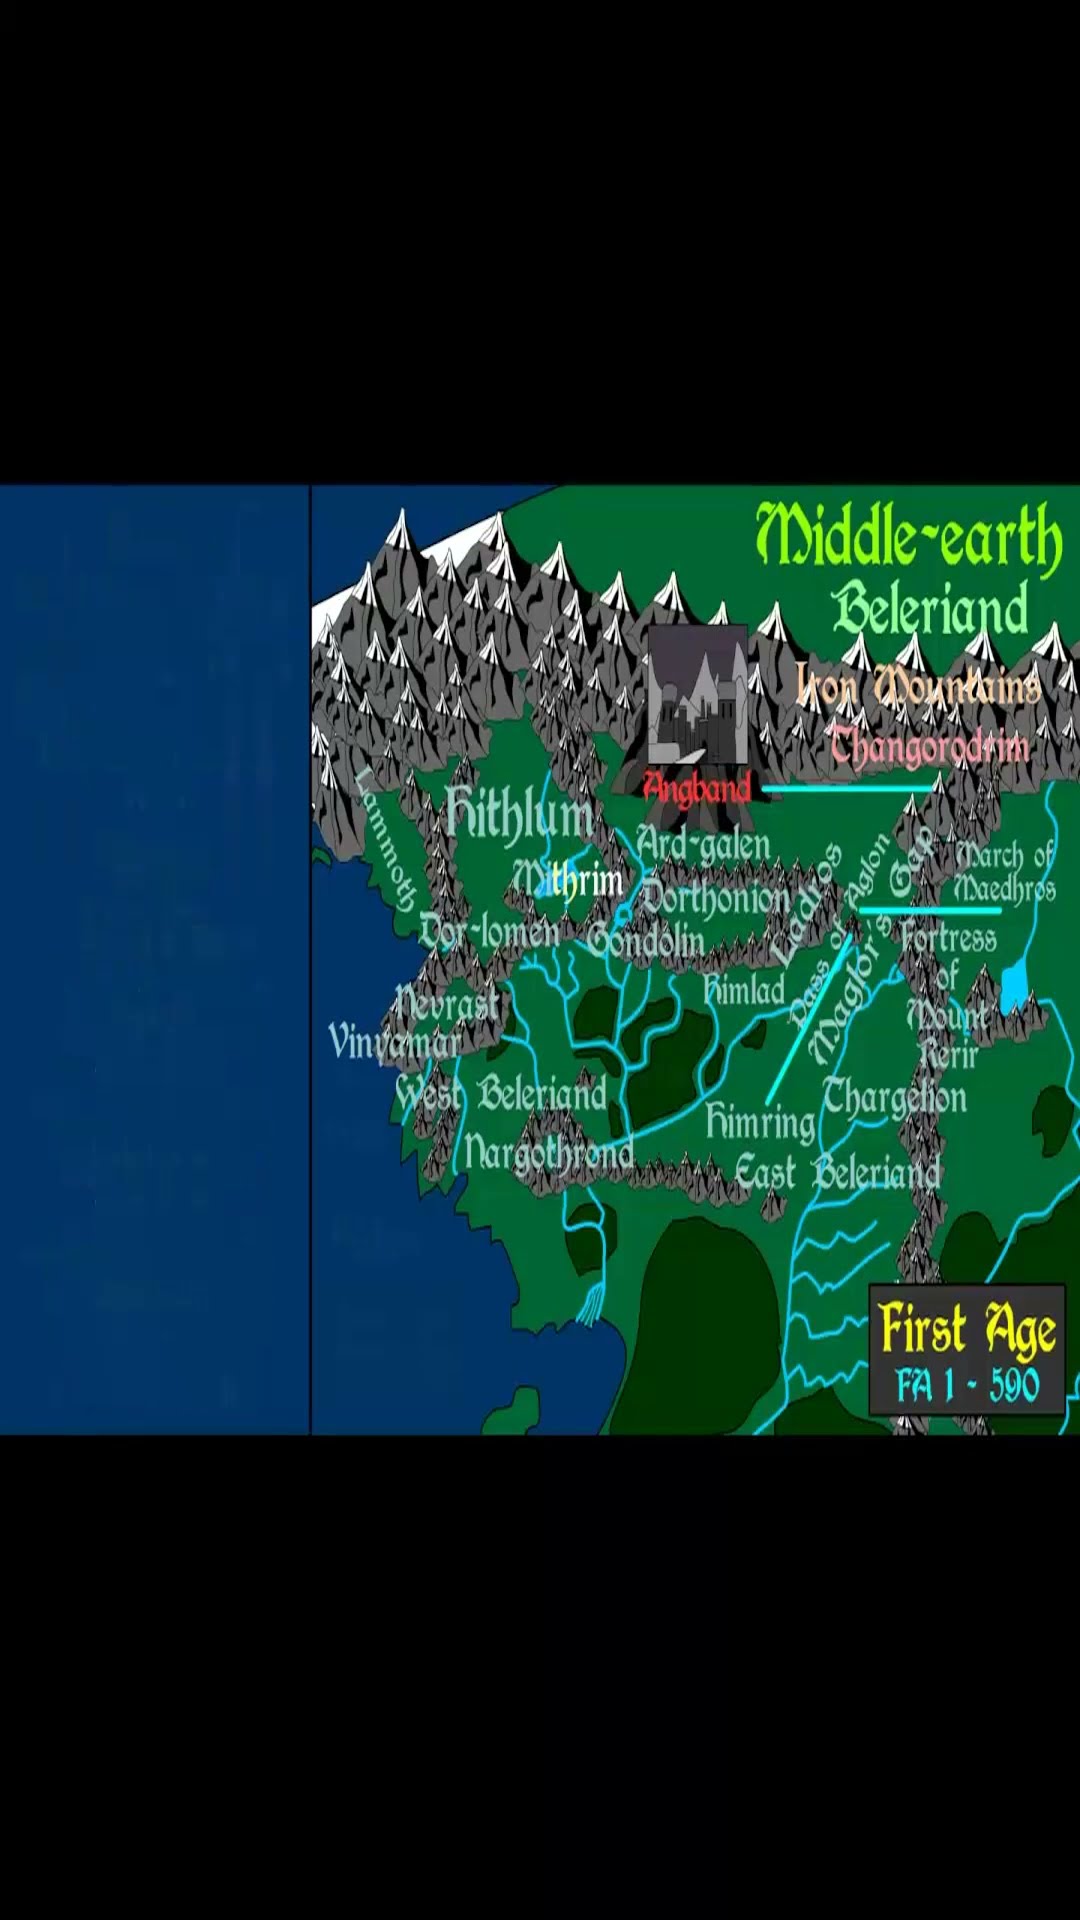 Lord of the Rings: The Noldor Elves settle in the First Age of Middle-earth #lotr #lordoftherings